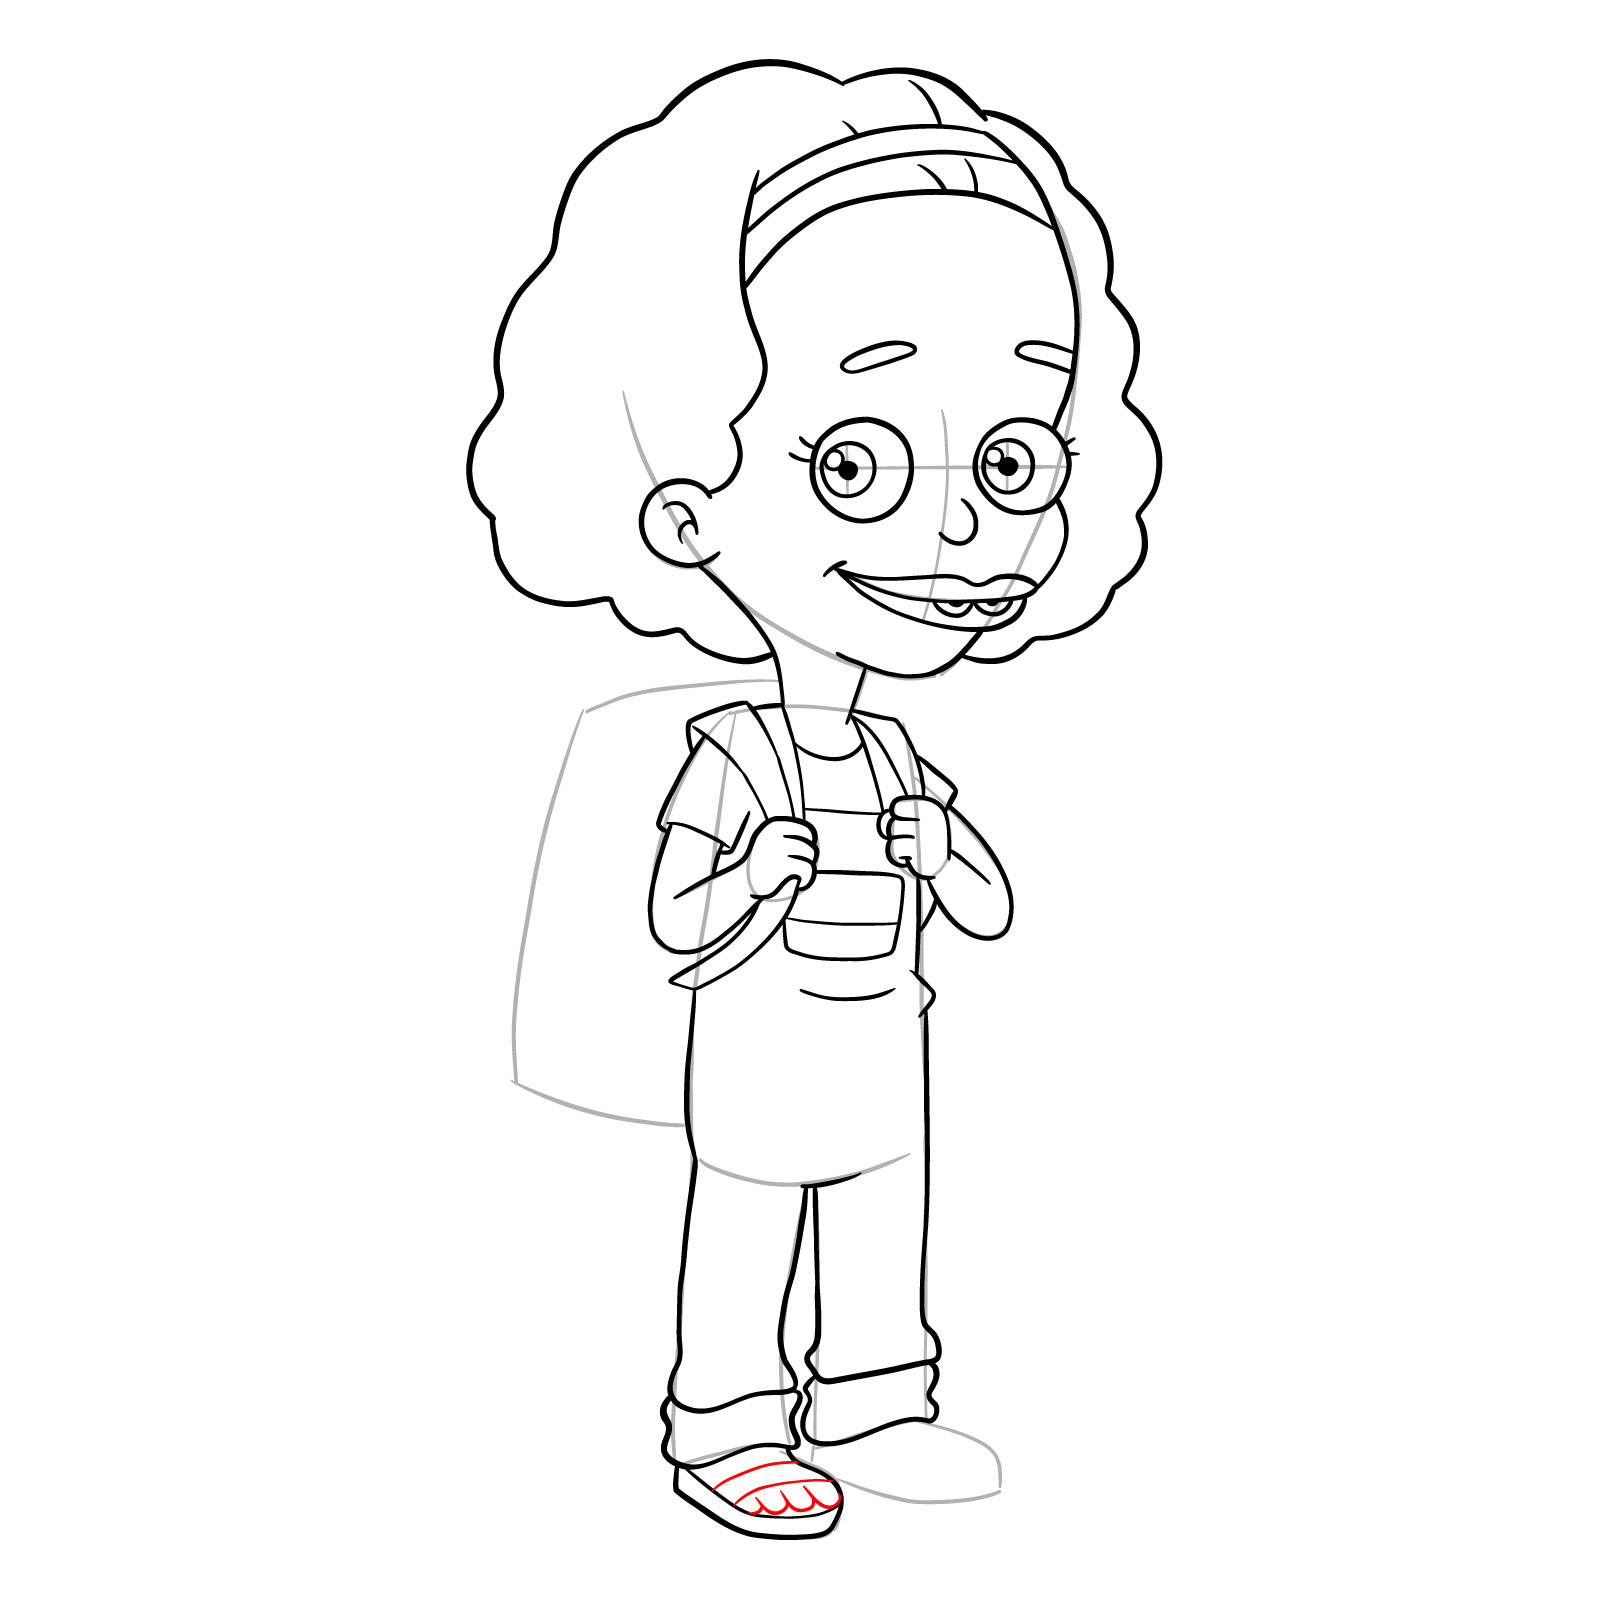 How to draw Missy from Big Mouth - step 26